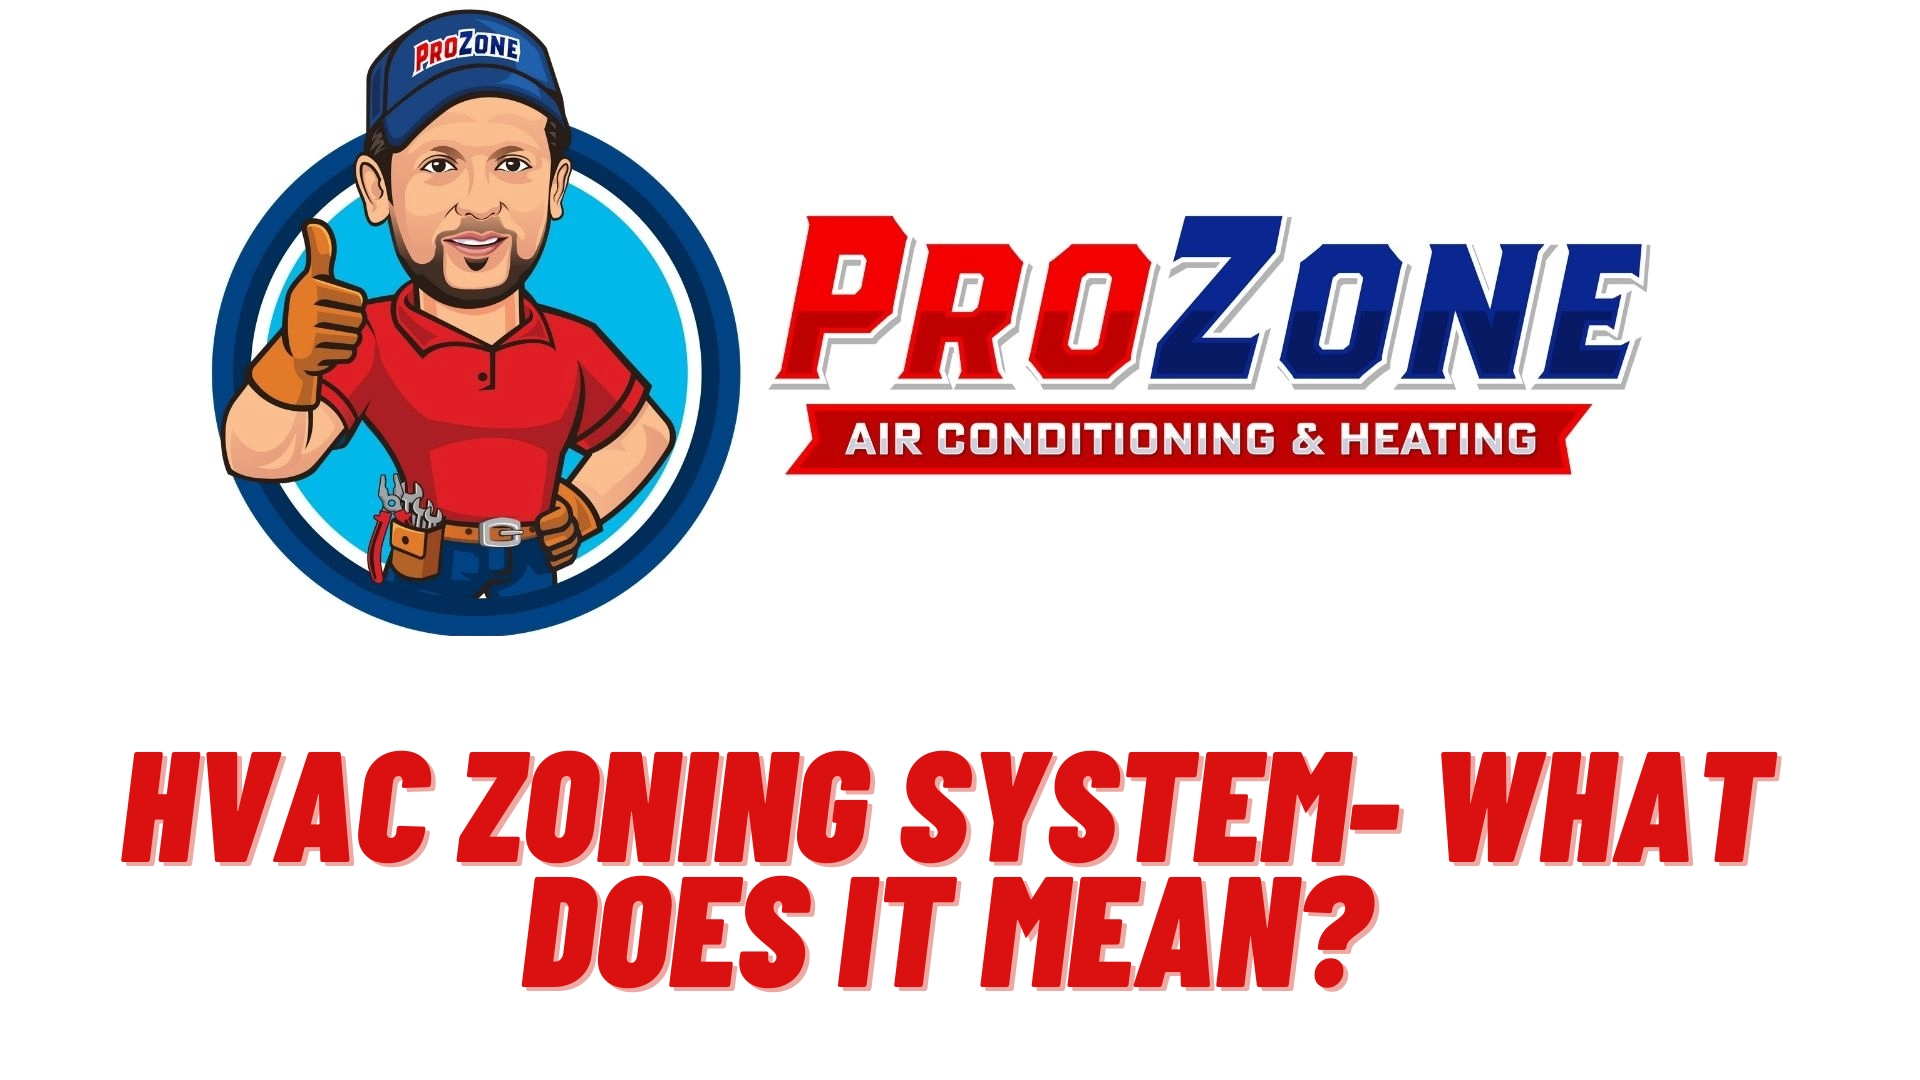 HVAC Zoning System- What Does It Mean?